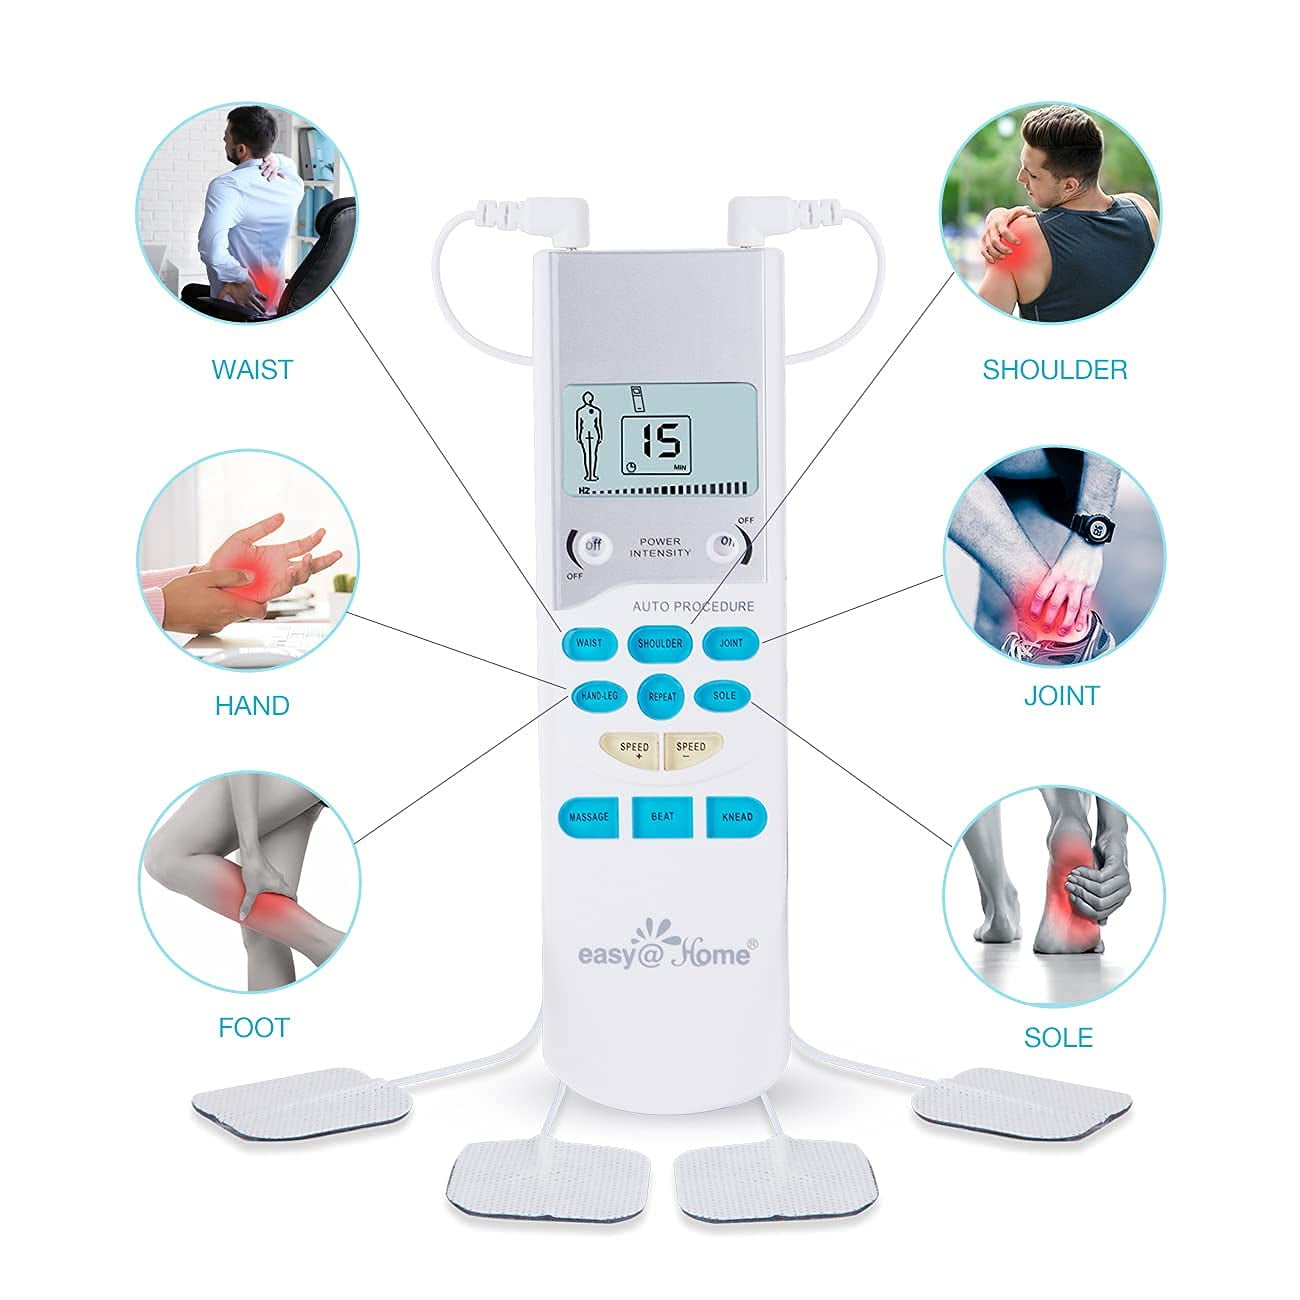  Easy@Home Heat TENS Unit, TENS EMS Unit with Heat Therapy, 510K  Cleared, Large Back Lit Display FSA Eligible Pain Management and Muscle  Stimulator Massager, Pain Relief Therapy EHE018 : Health 